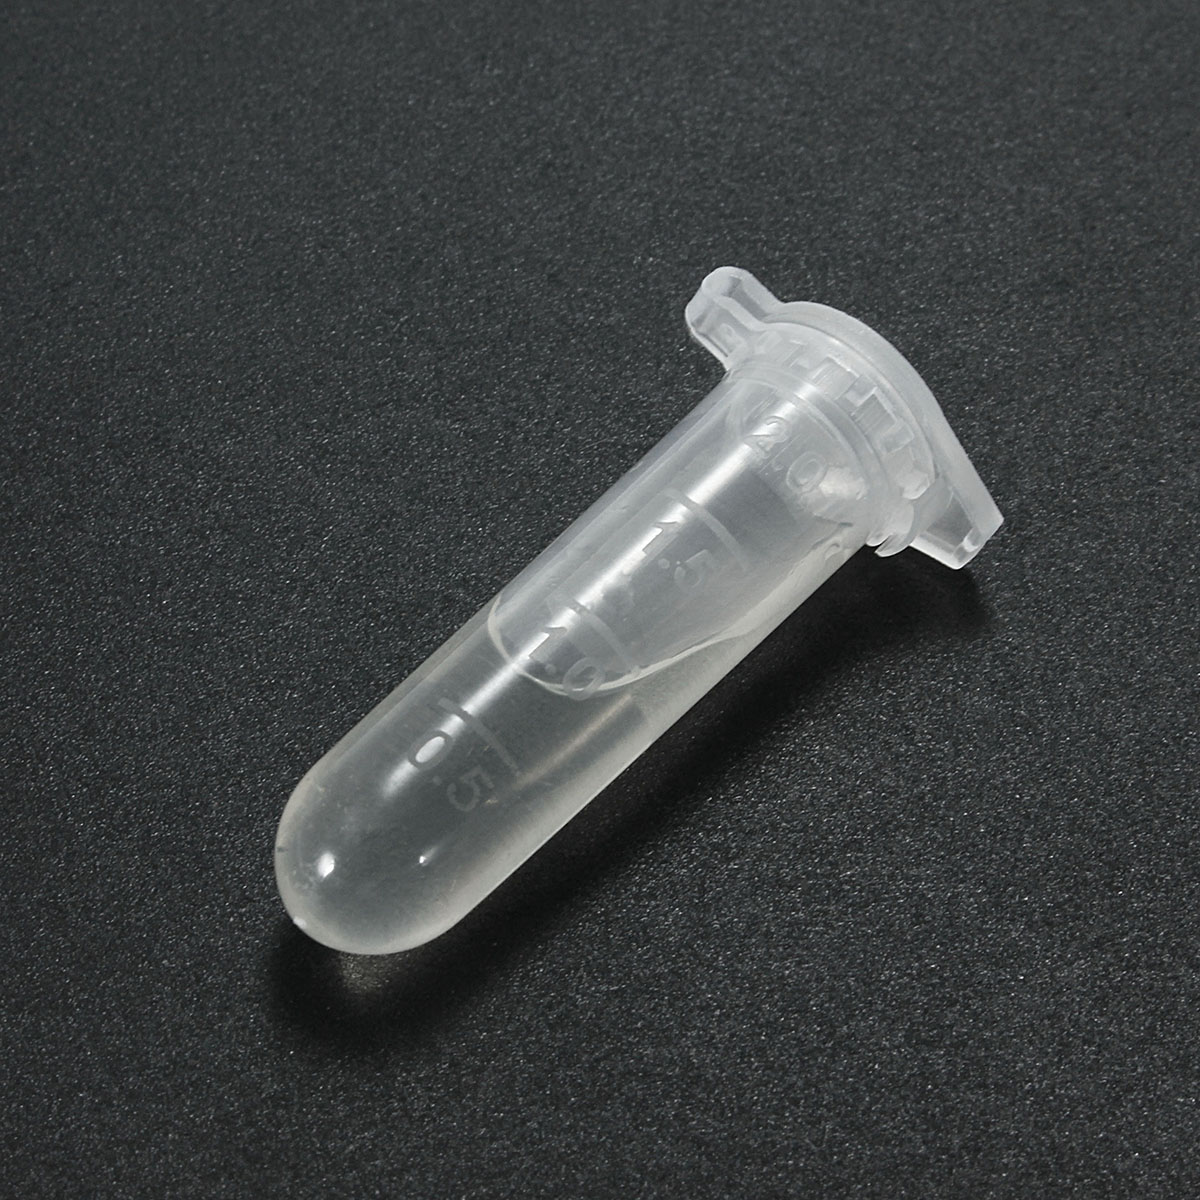 2ml-Test-Tube-Centrifuge-Vial-Clear-Plastic-with-Snap-Cap-for-Lab-Laboratory-1156457-4